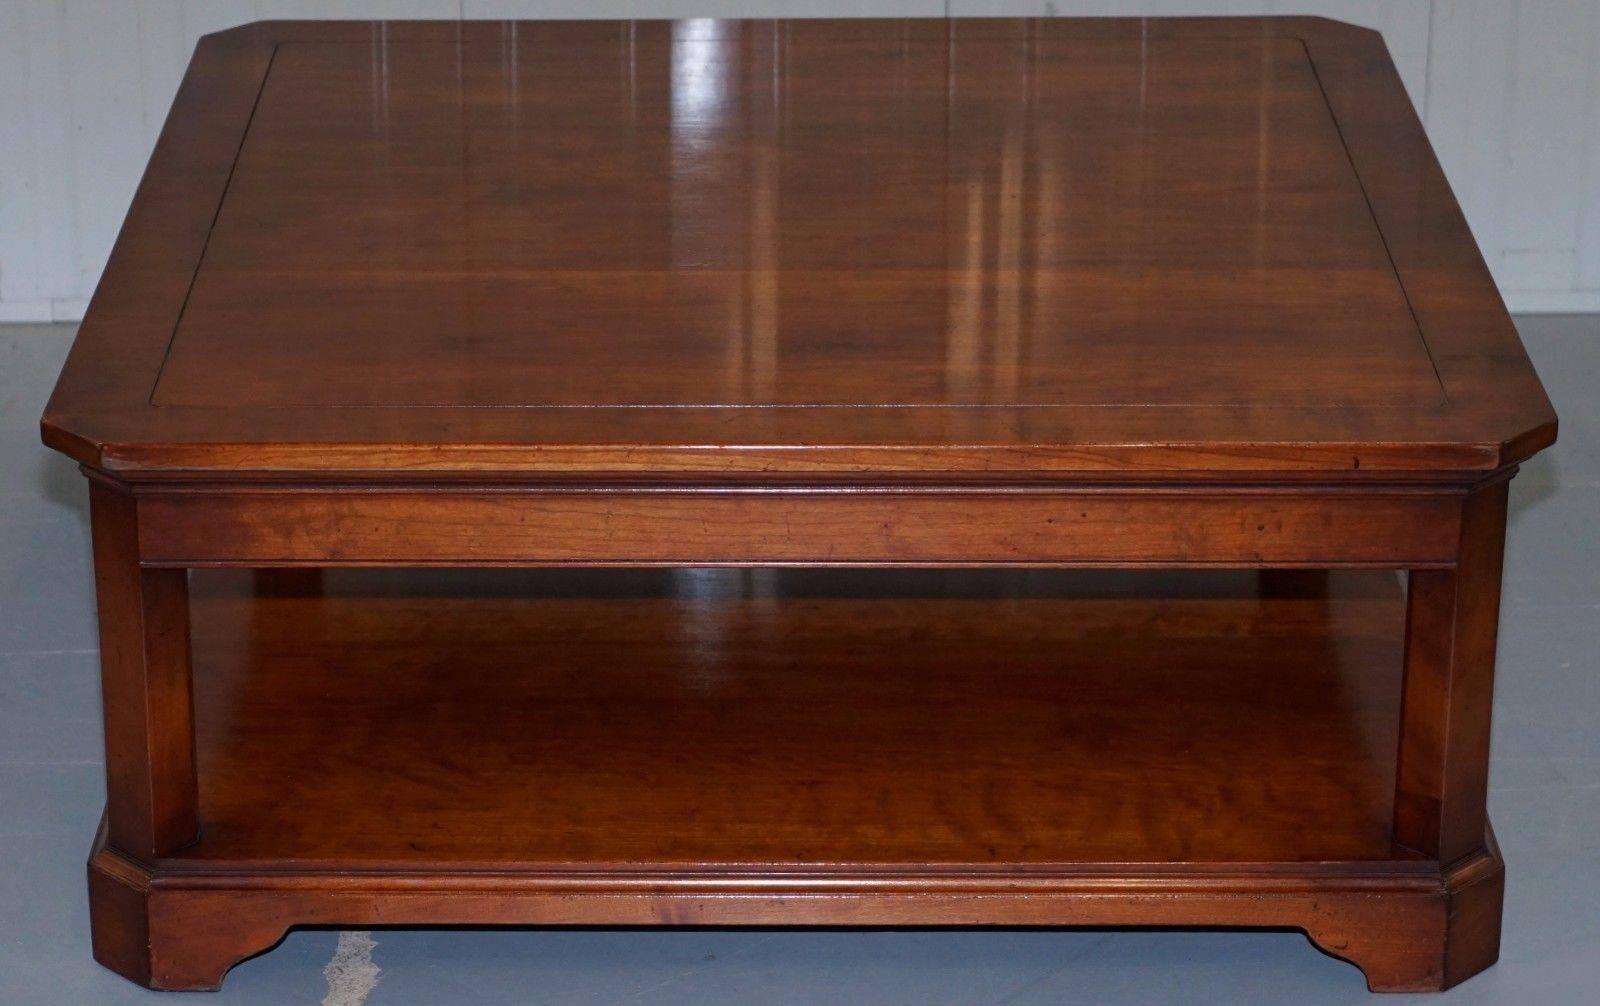 We are delighted to offer for sale this very rare Harrods London original Kennedy Cherrywood square coffee table RRP £3500

R. E. H. Kennedy Limited Traditional English Cabinet Makers

R. E. H. Kennedy has been producing some of the finest